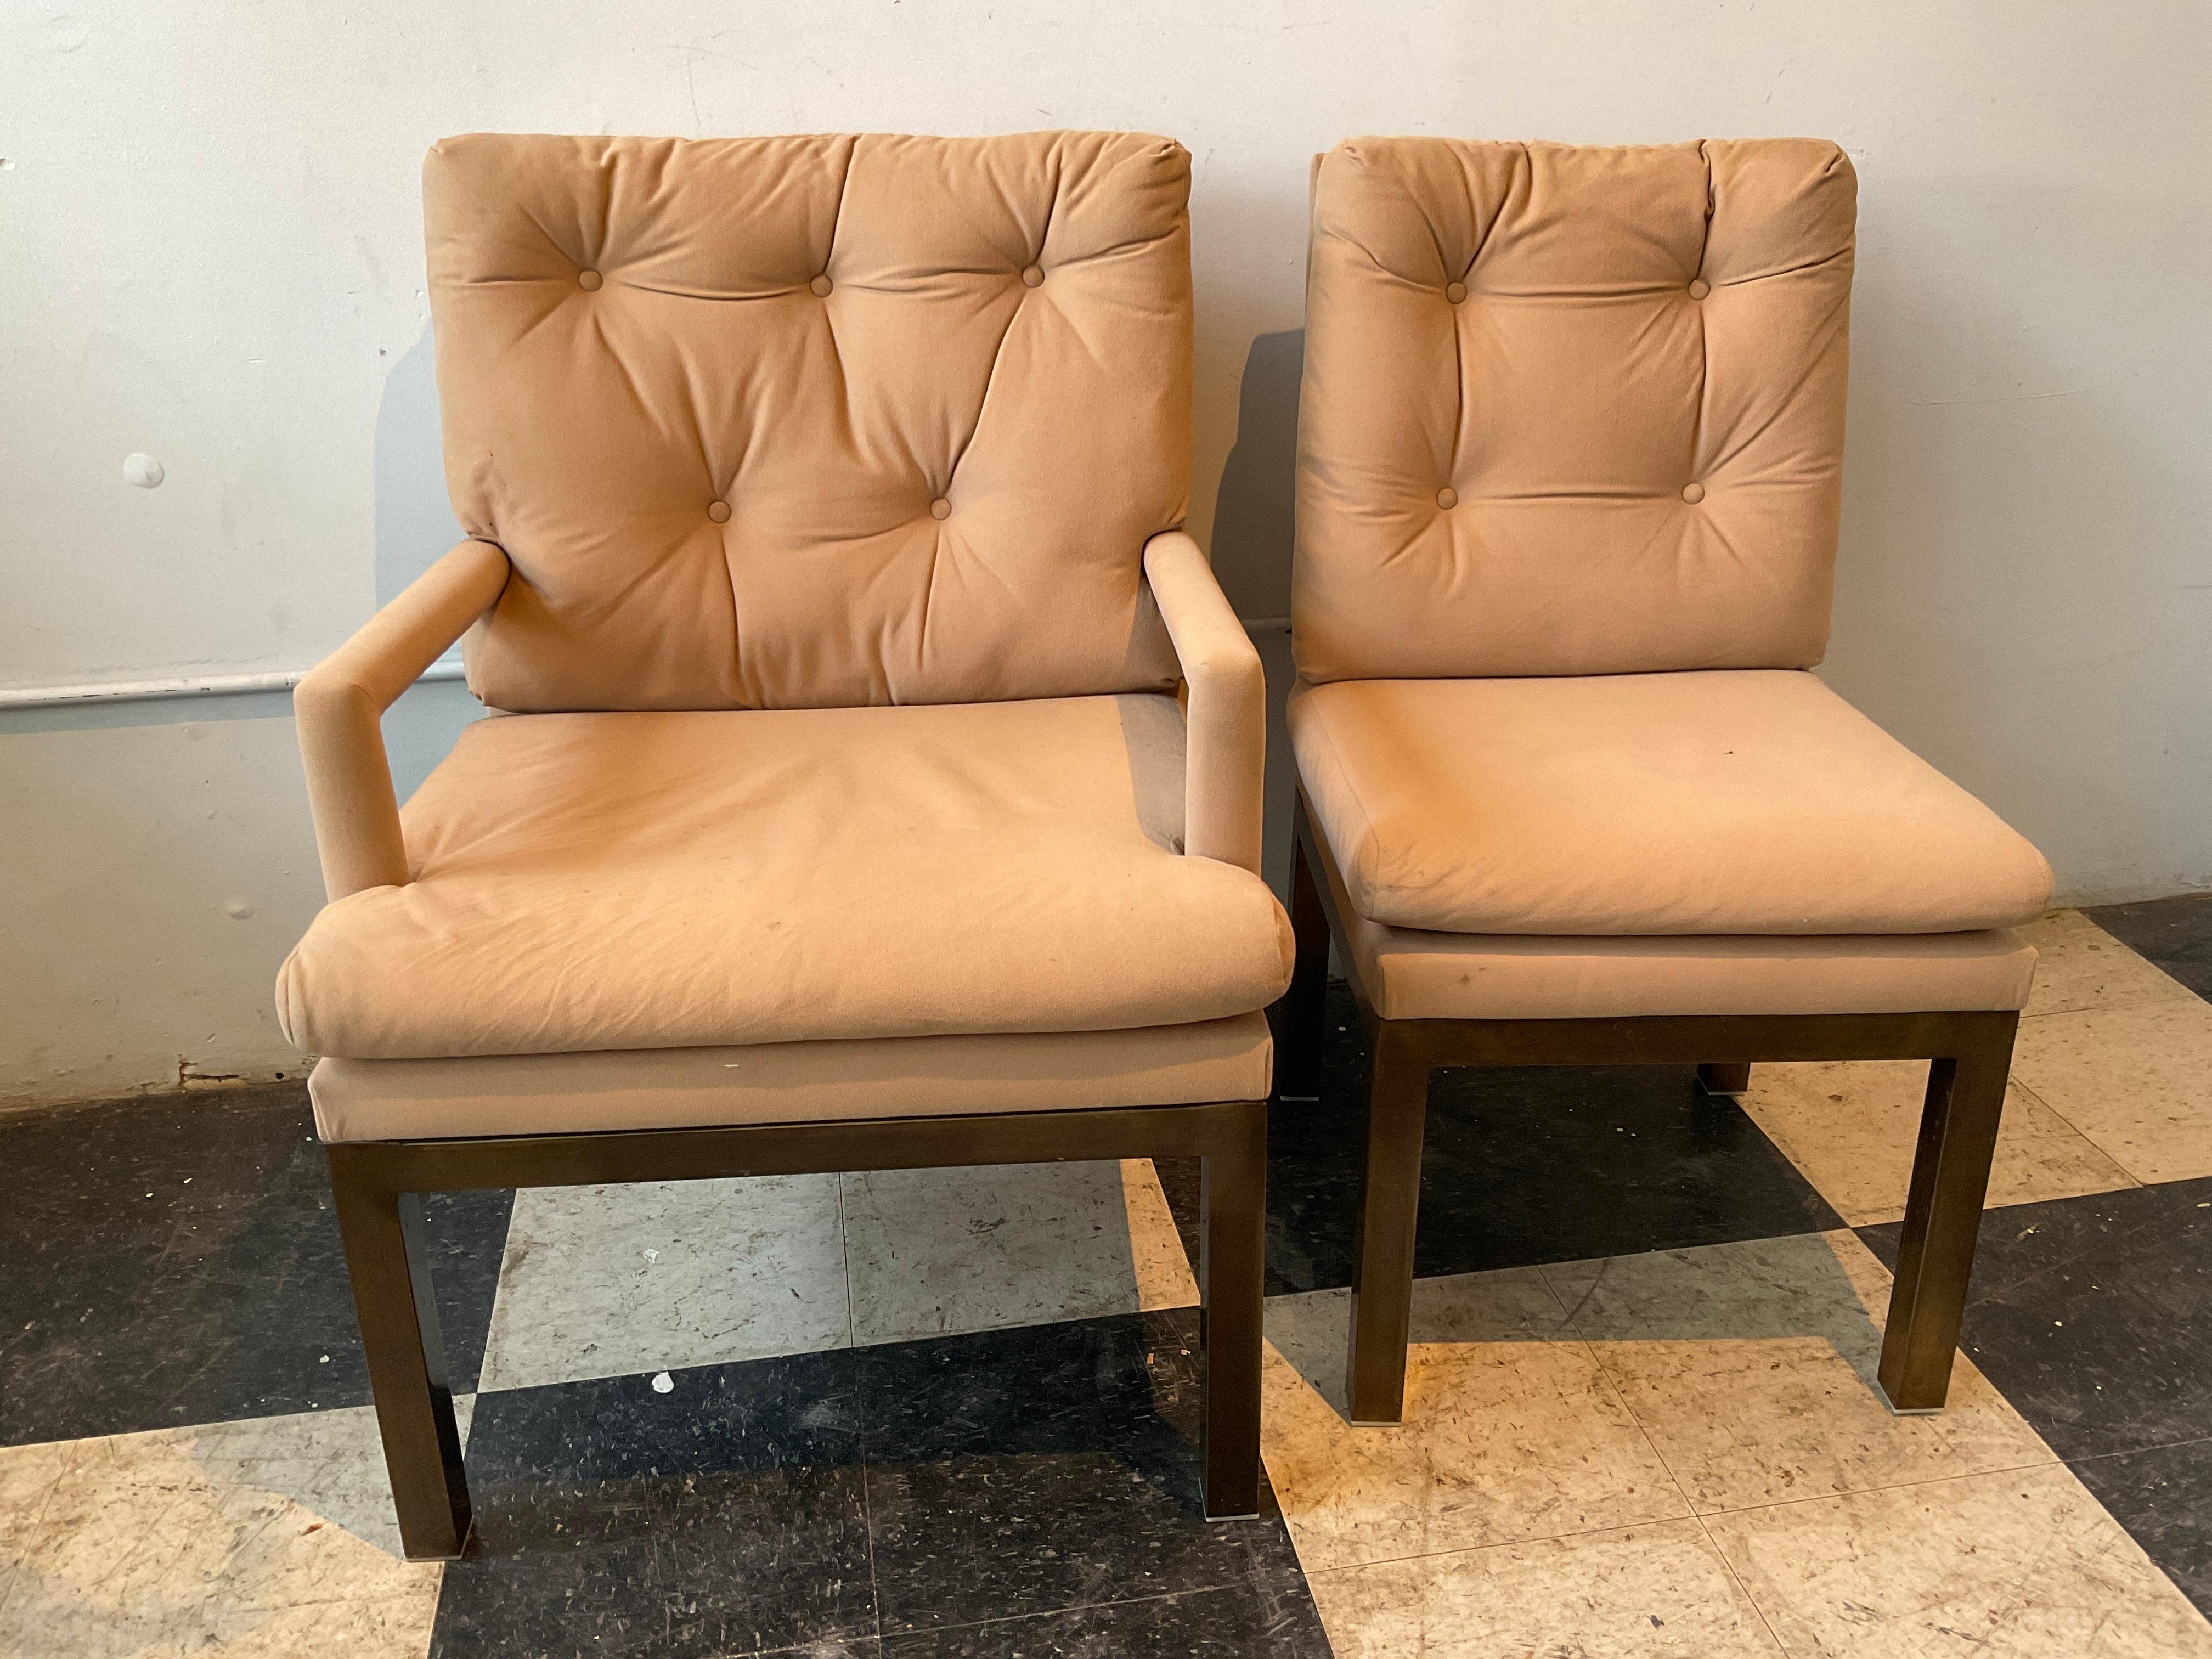 4 Mastercraft style dining chairs from the 1980s. Brass basses. Needs reupholstering. Made in Spain.